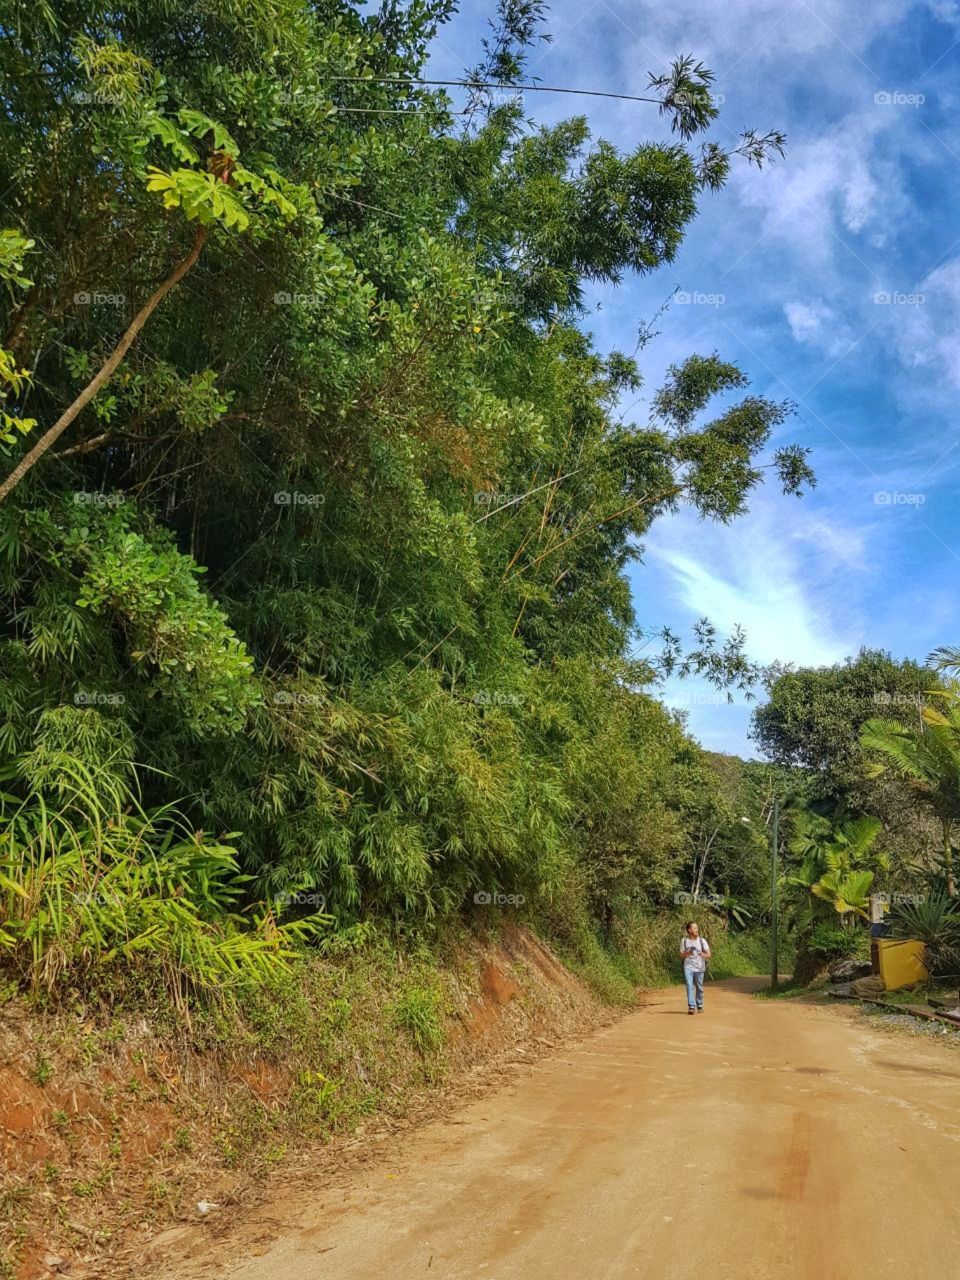 The traveler walks along the road among the green Brazilian forest. The sun, the heat and the sky.